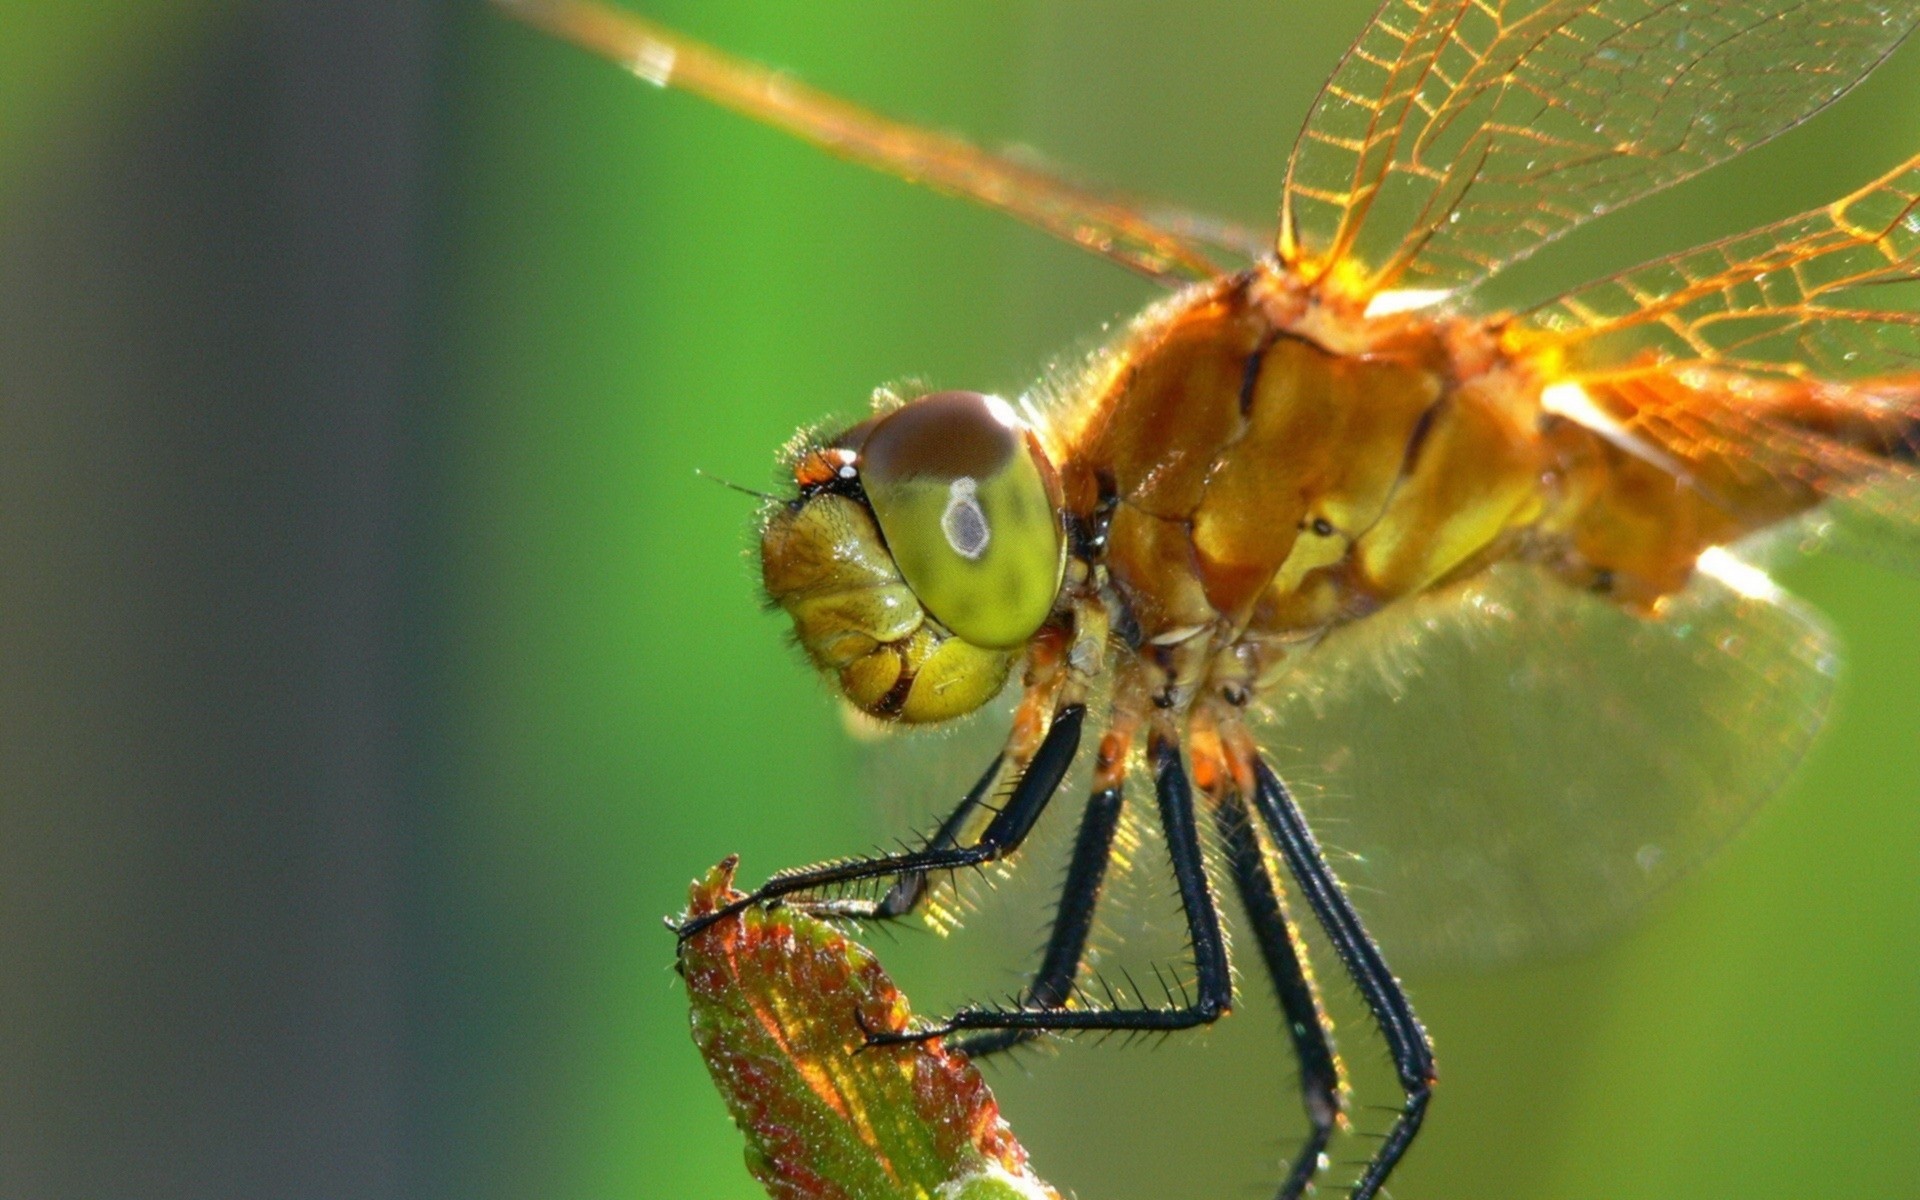 insects insect dragonfly spider wildlife invertebrate animal nature wild fly close-up